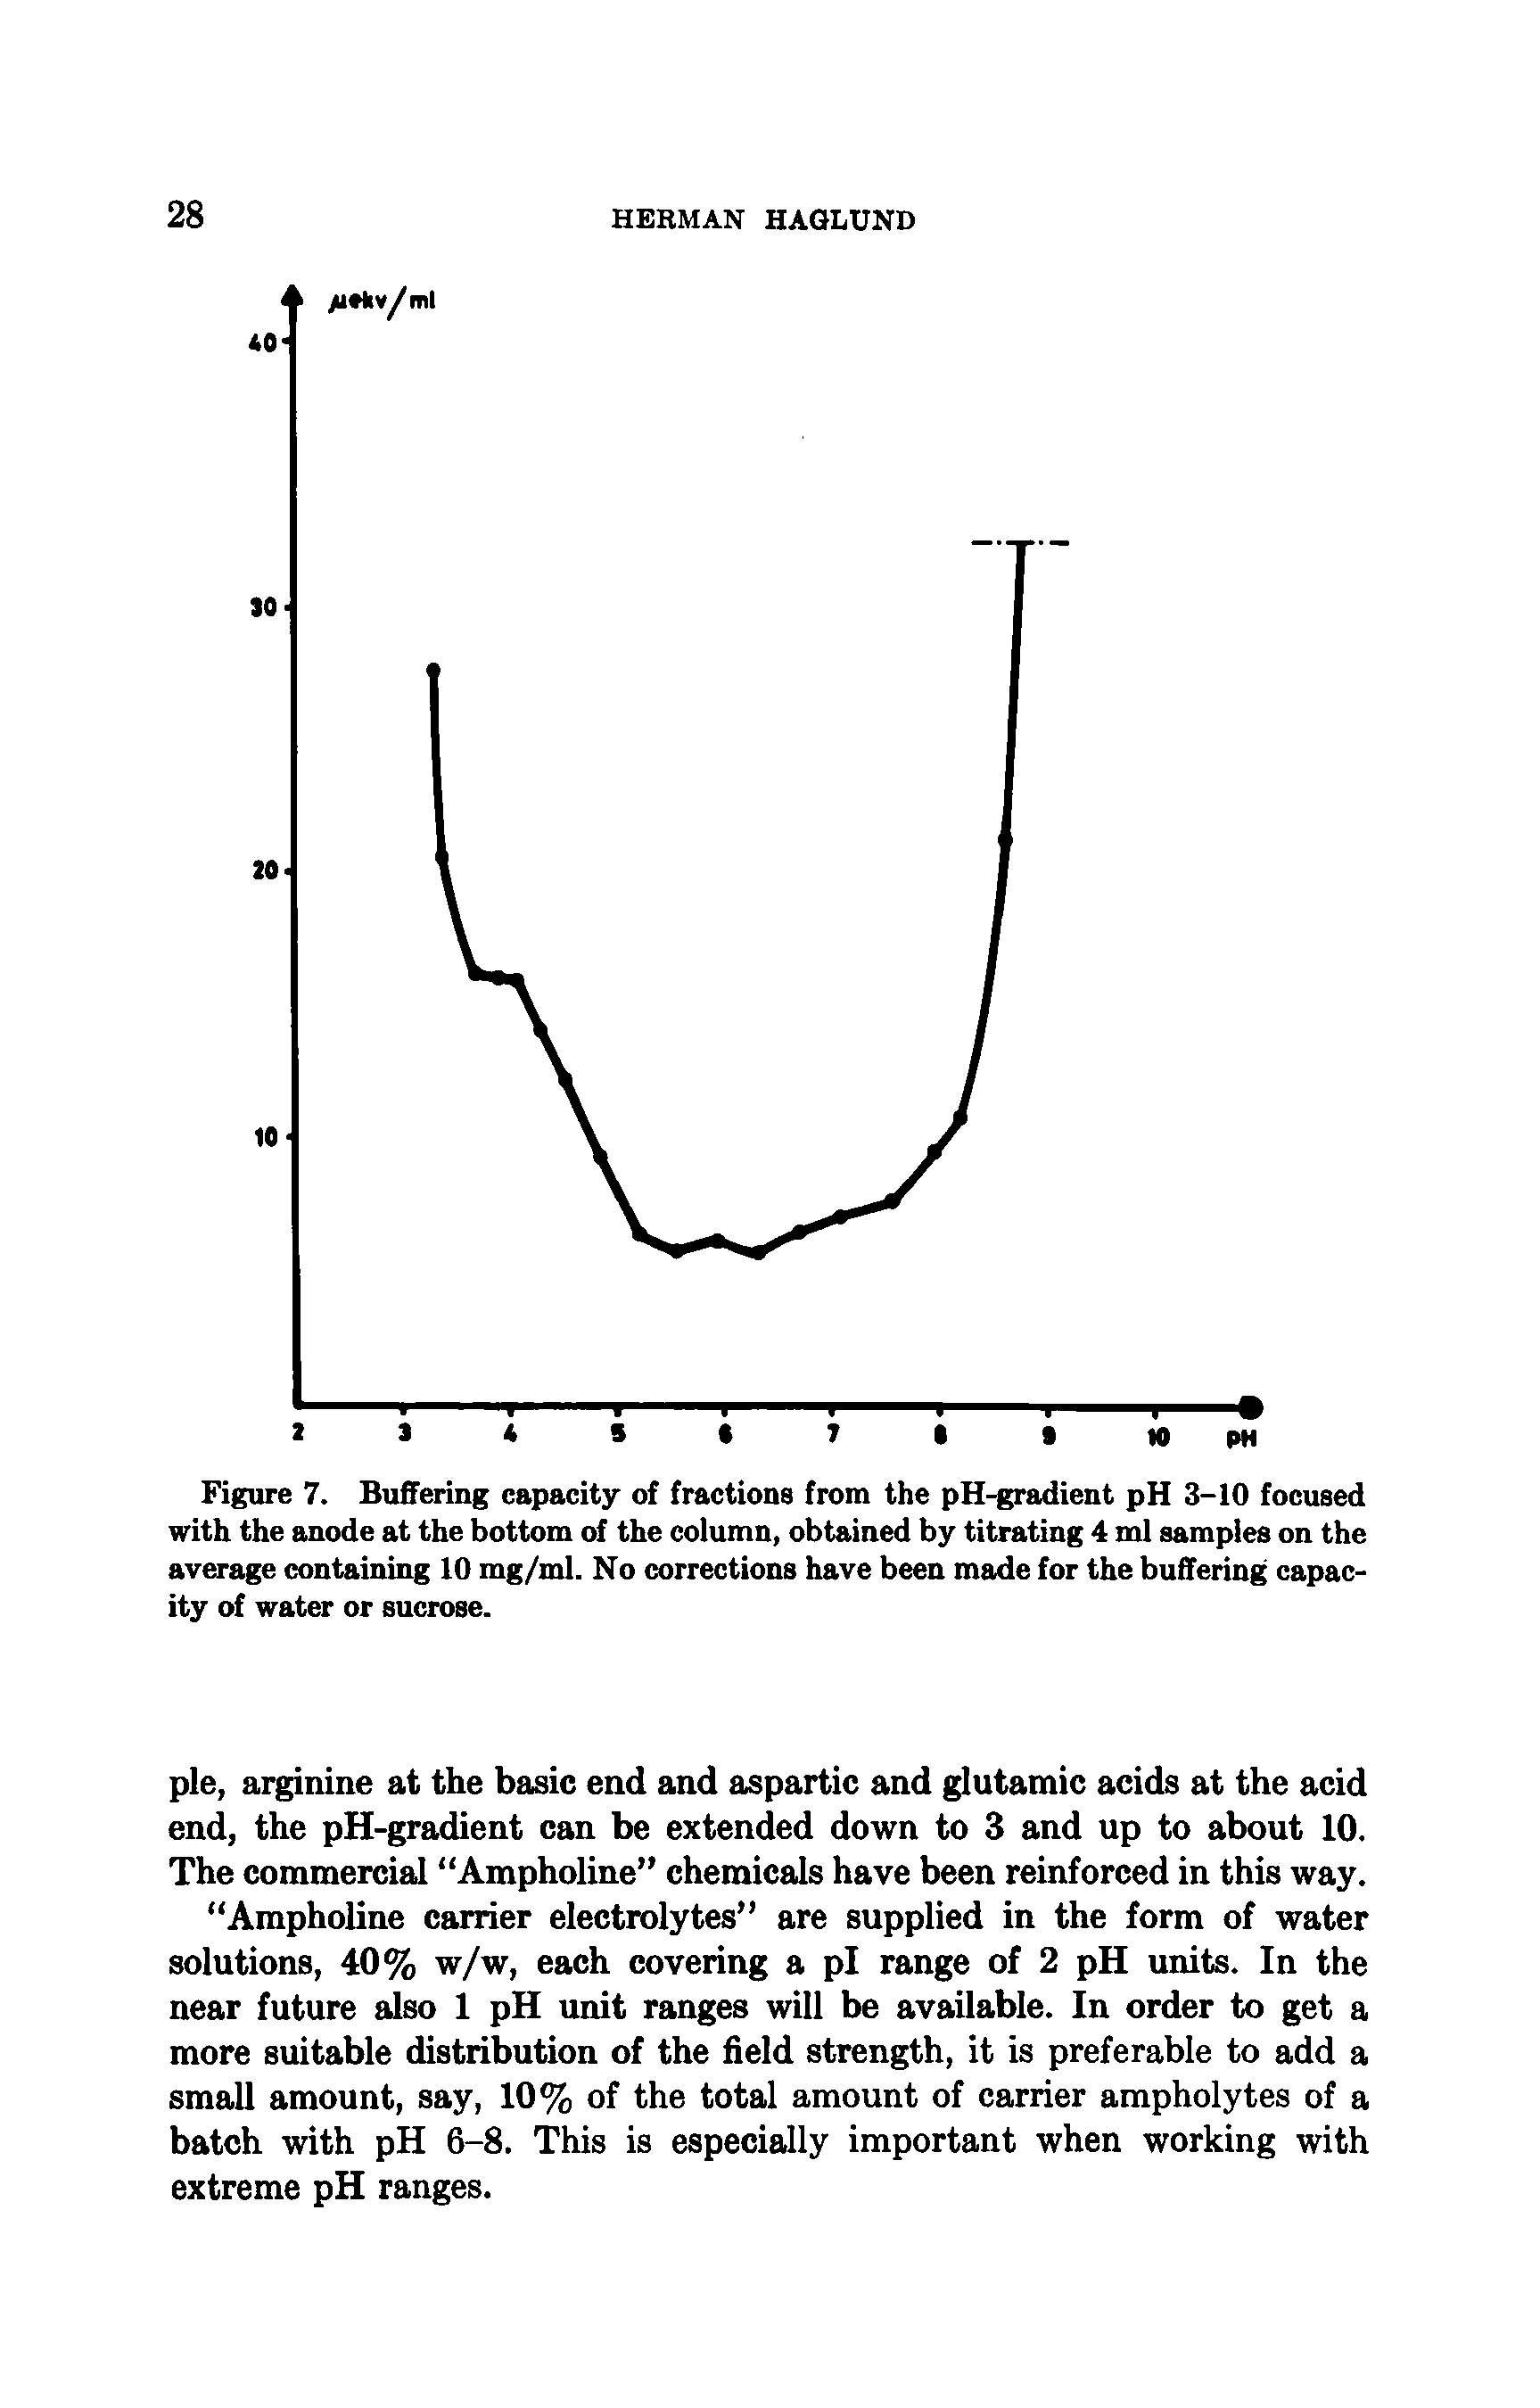 Figure 7. Buffering capacity of fractions from the pH-gradient pH 3-10 focused with the anode at the bottom of the column, obtained by titrating 4 id samples on the average containing 10 mg/ml. No corrections have been made for the buffering capacity of water or sucrose.